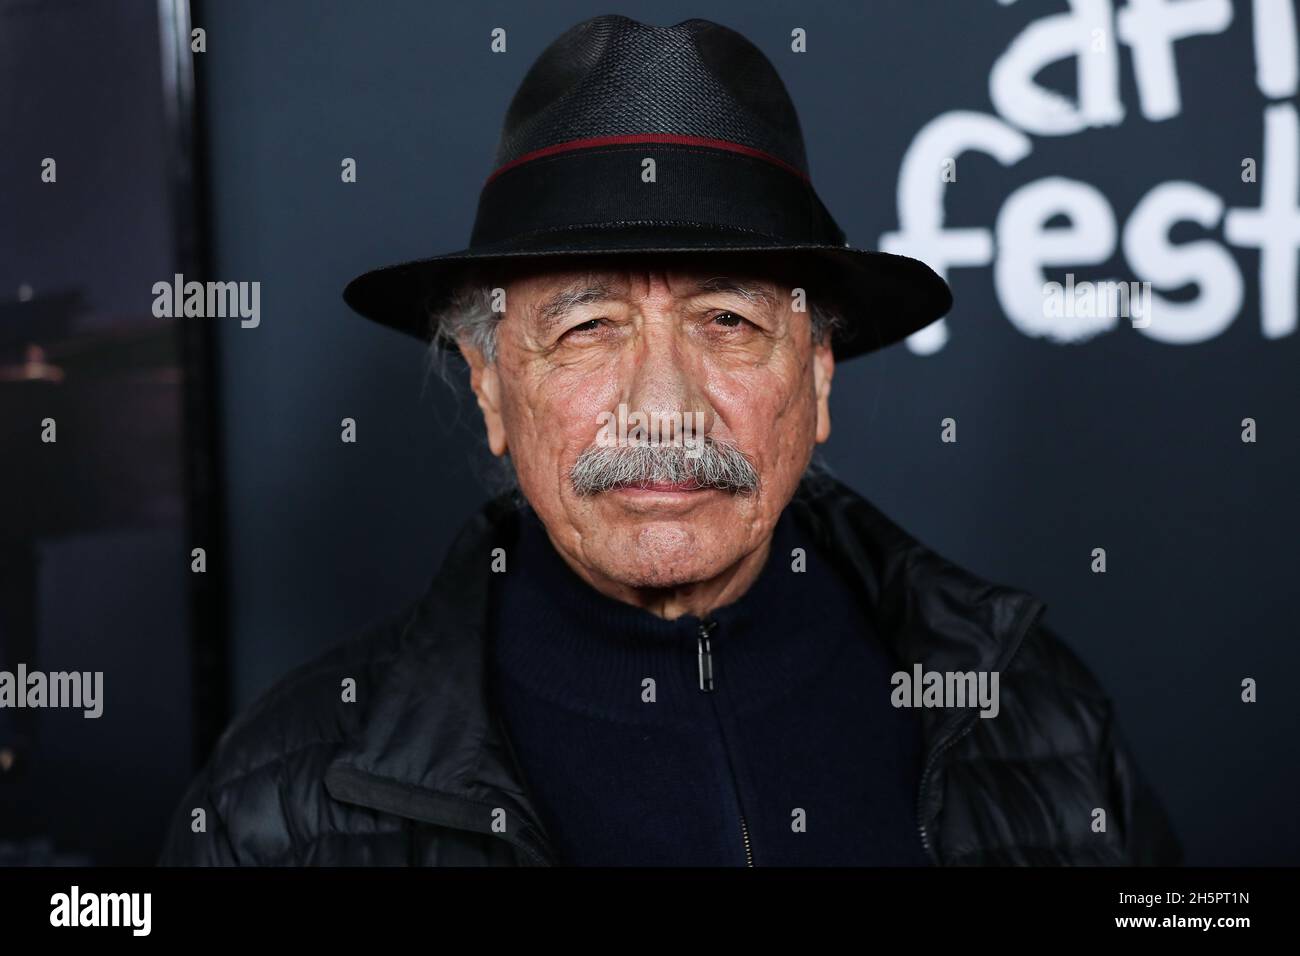 HOLLYWOOD, LOS ANGELES, CALIFORNIA, USA - NOVEMBER 10: Actor Edward James Olmos arrives at the 2021 AFI Fest - Opening Night Gala Premiere Of Netflix's 'tick, tick…BOOM!' held at the TCL Chinese Theatre IMAX on November 10, 2021 in Hollywood, Los Angeles, California, United States. (Photo by Xavier Collin/Image Press Agency) Stock Photo